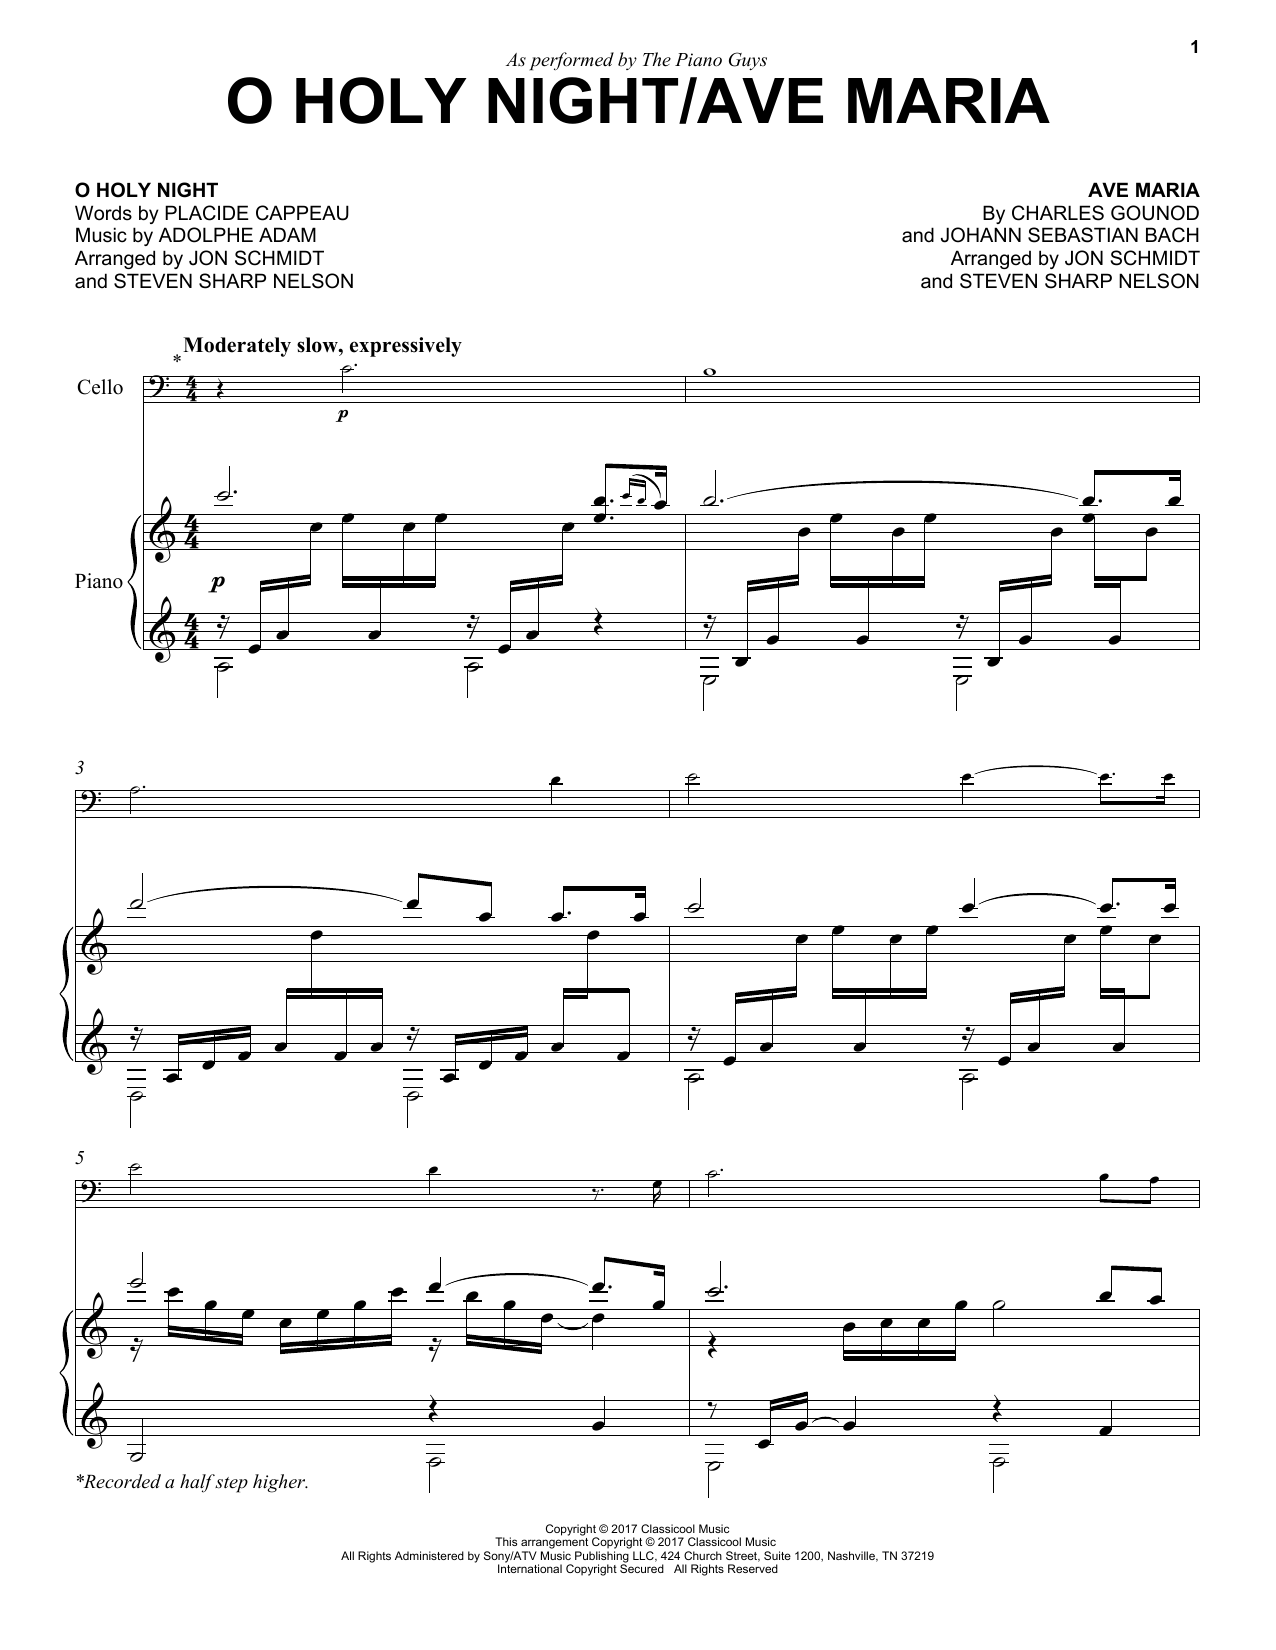 Download The Piano Guys O Holy Night/Ave Maria Sheet Music